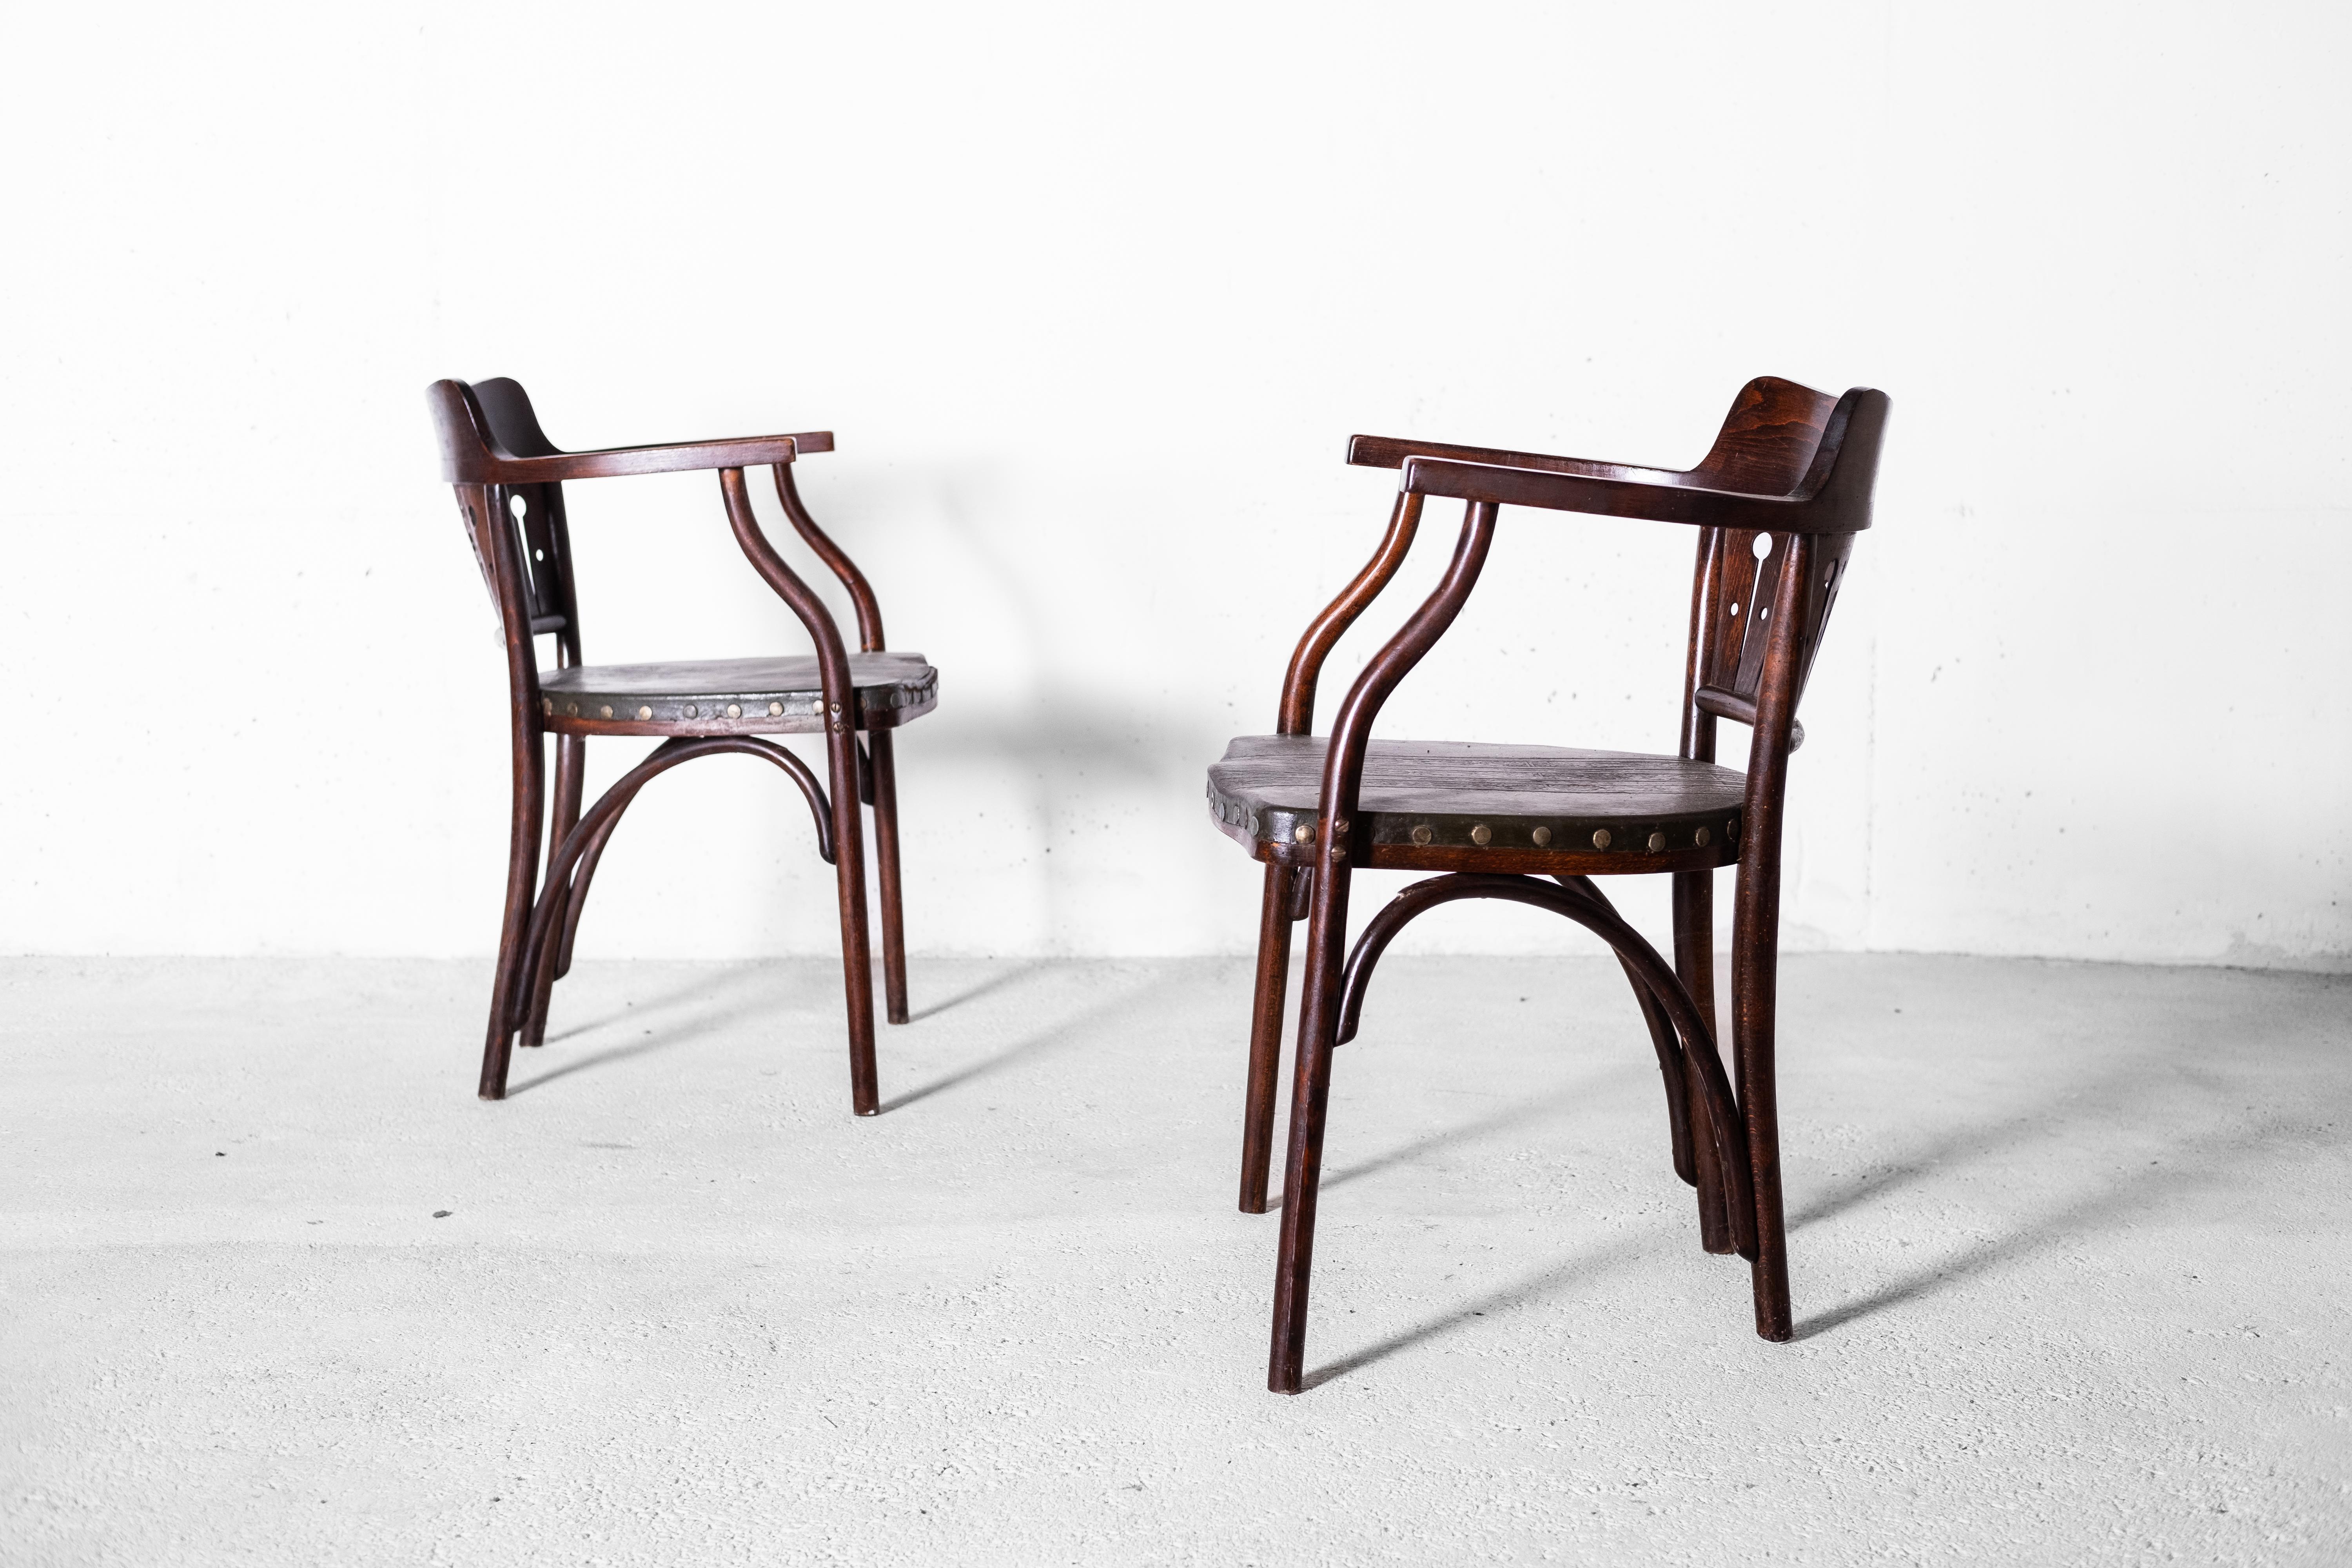 Art Nouveau Bentwood Armchairs by O. Wagner / G. Siegel, Thonet, Set of 2, 1905 For Sale 5